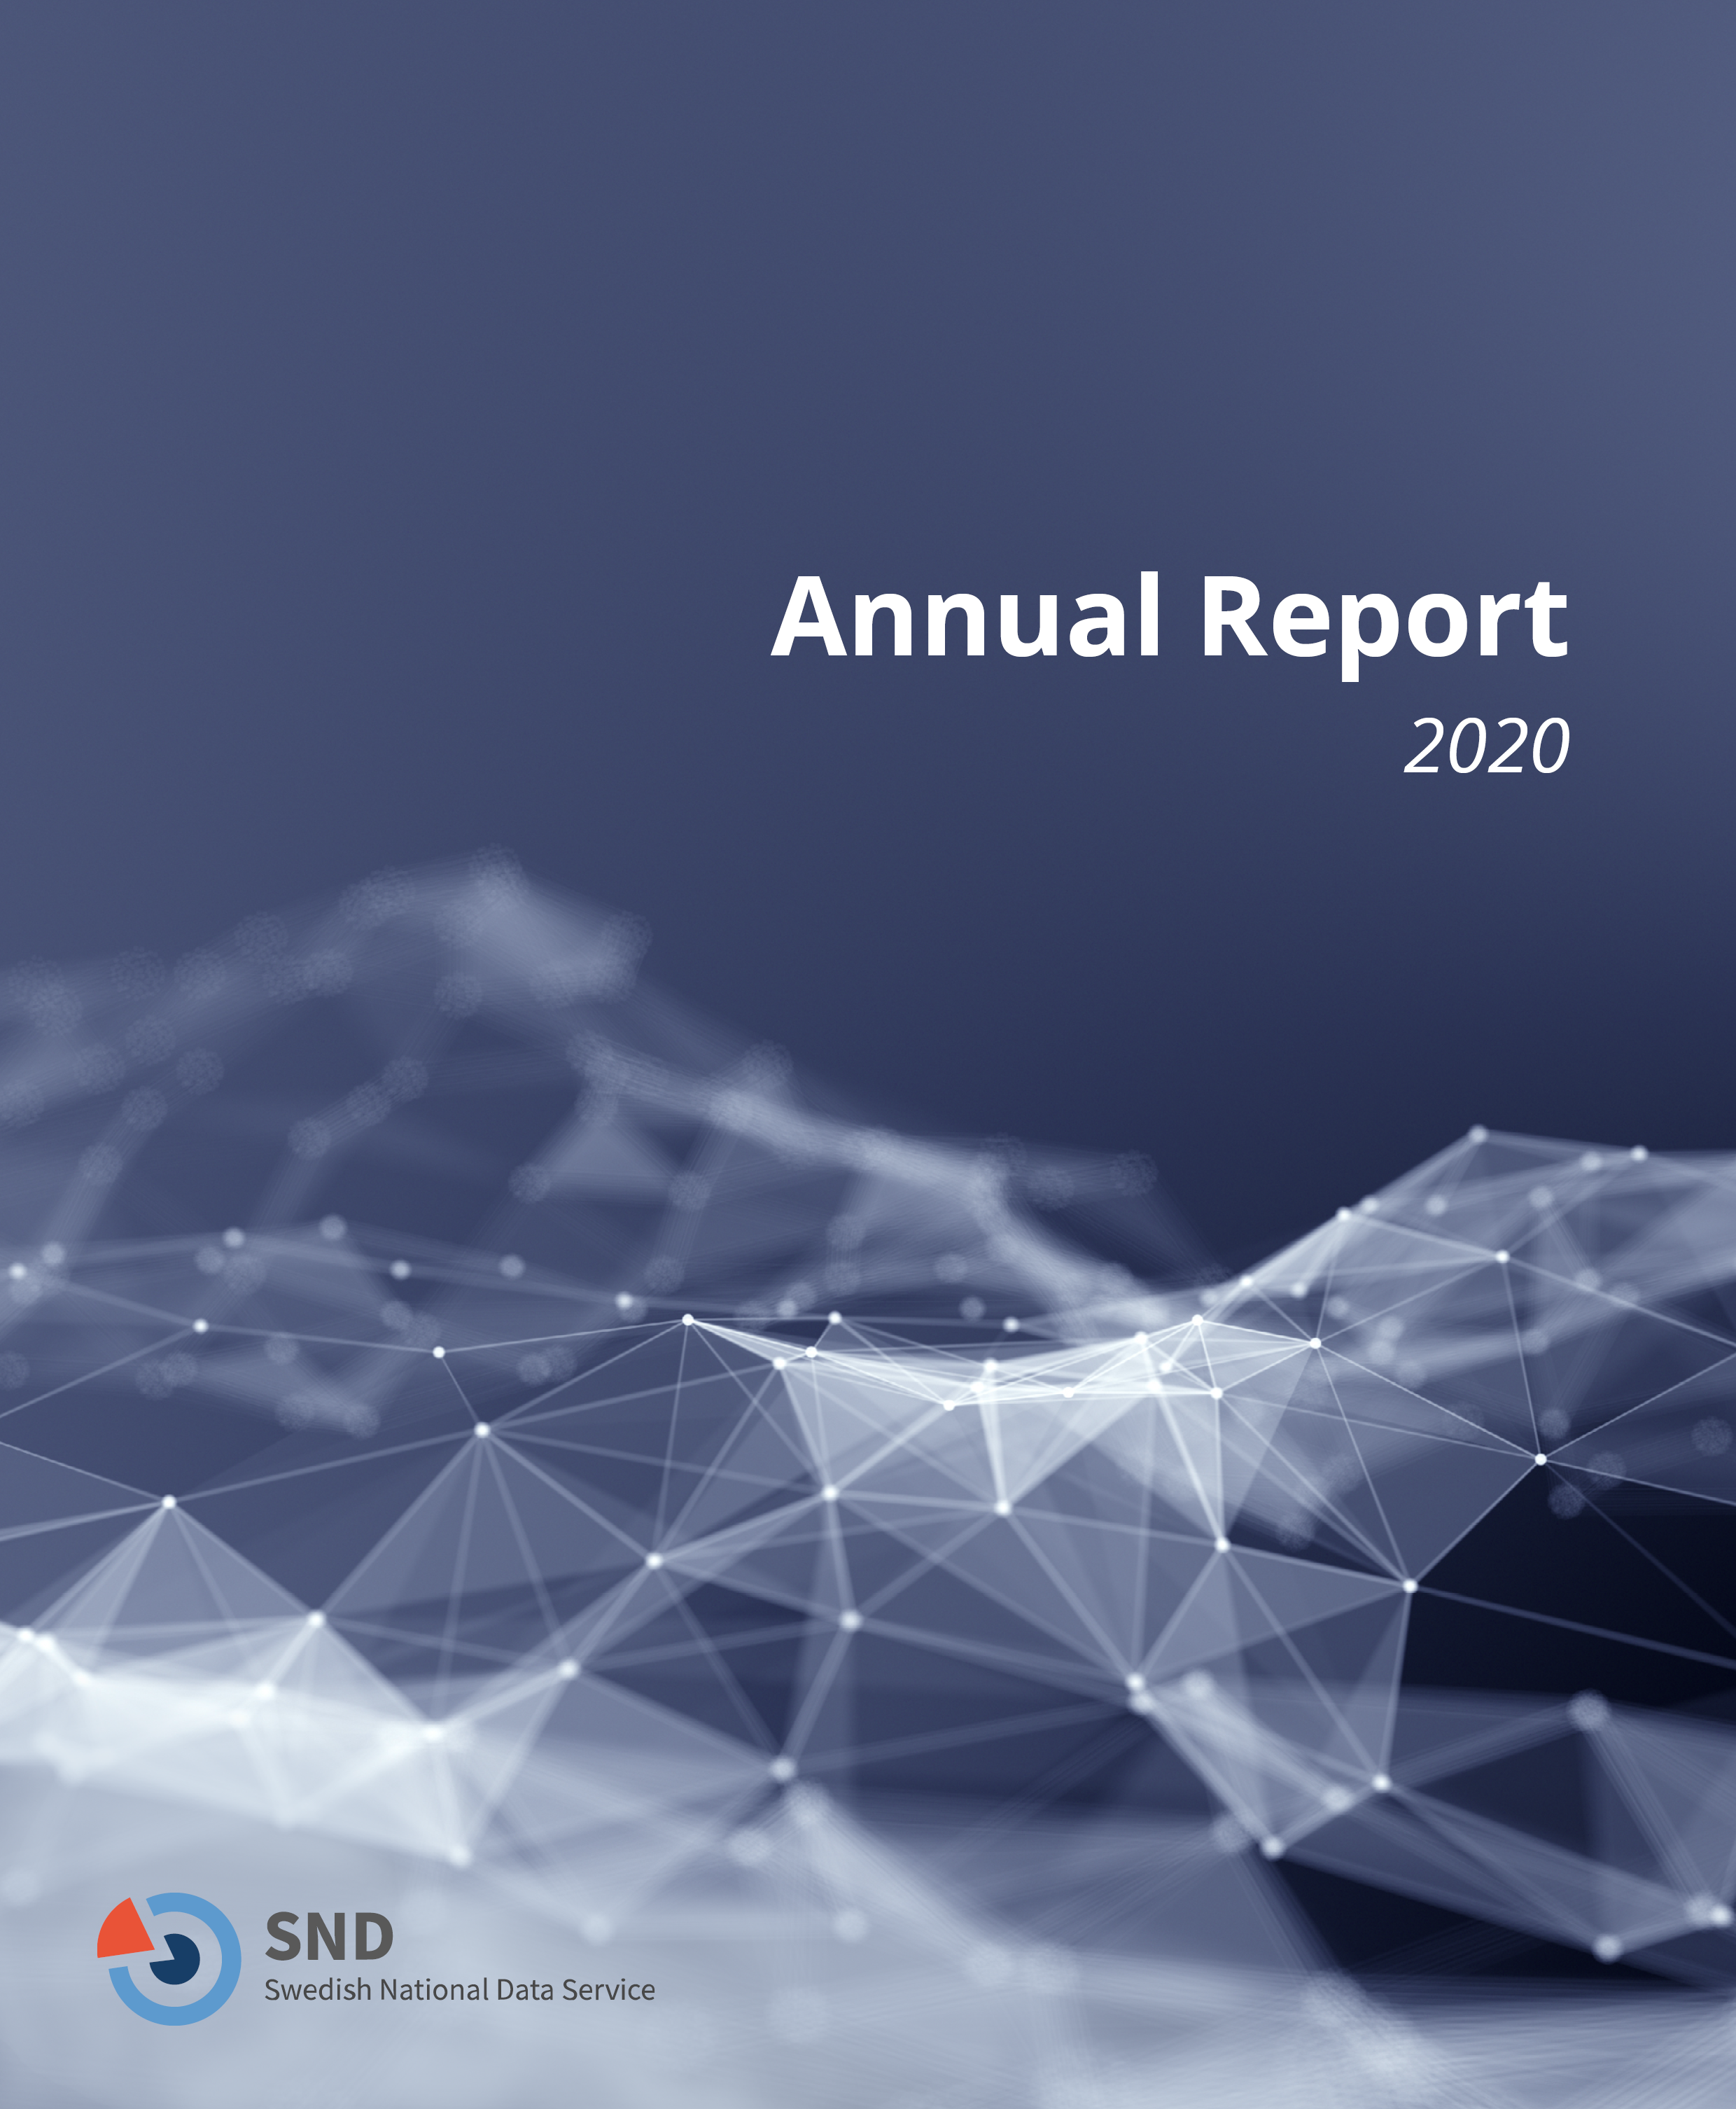 Front page of the 2020 annual report for SND